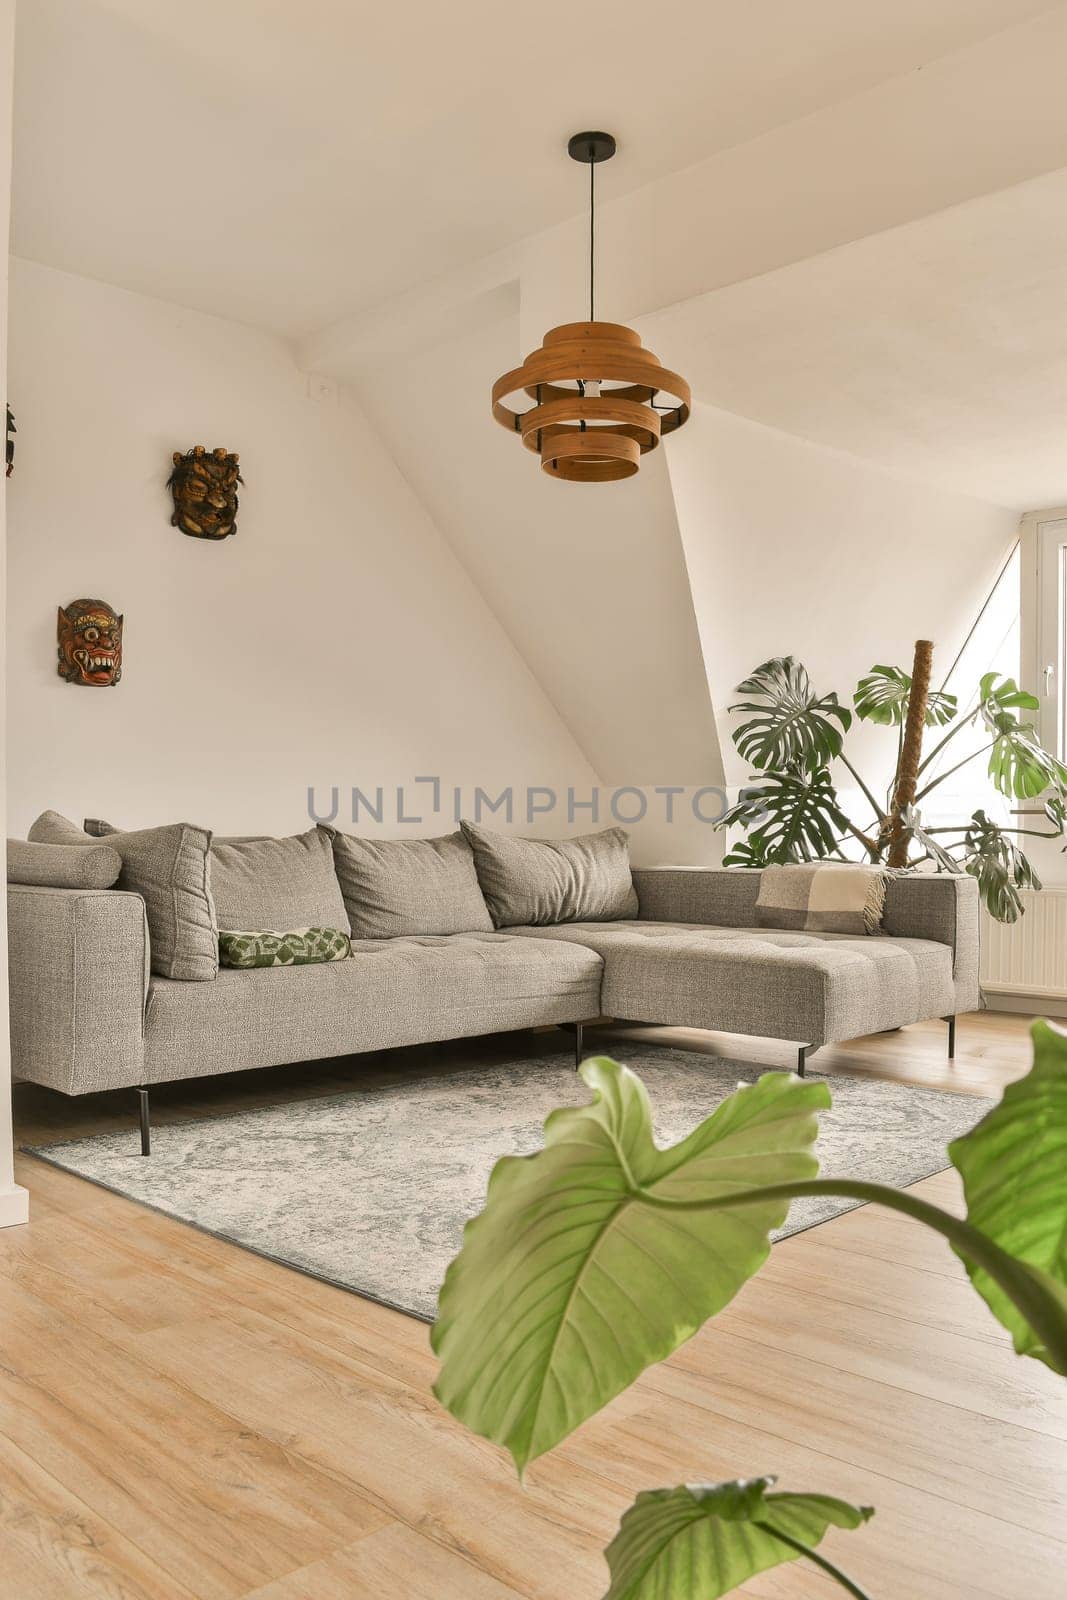 a living room with wood flooring and white walls there is a large plant in the center of the room